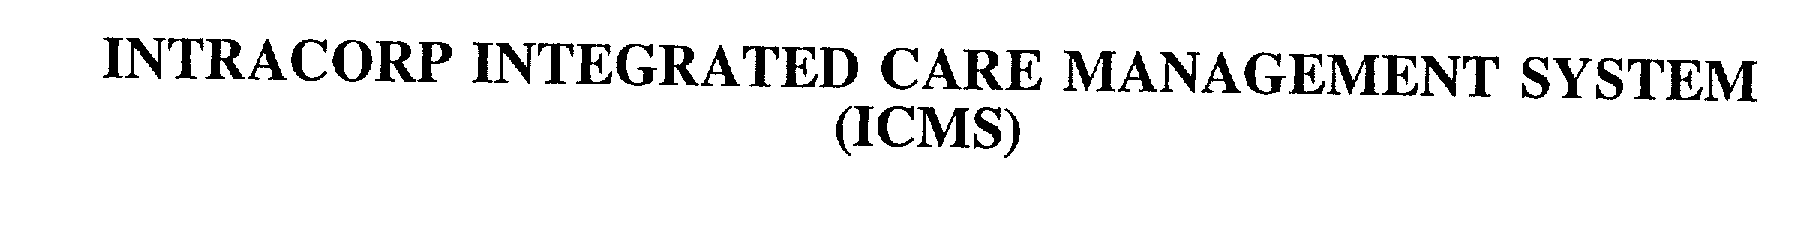  INTRACORP INTEGRATED CARE MANAGEMENT SYSTEM (ICMS)